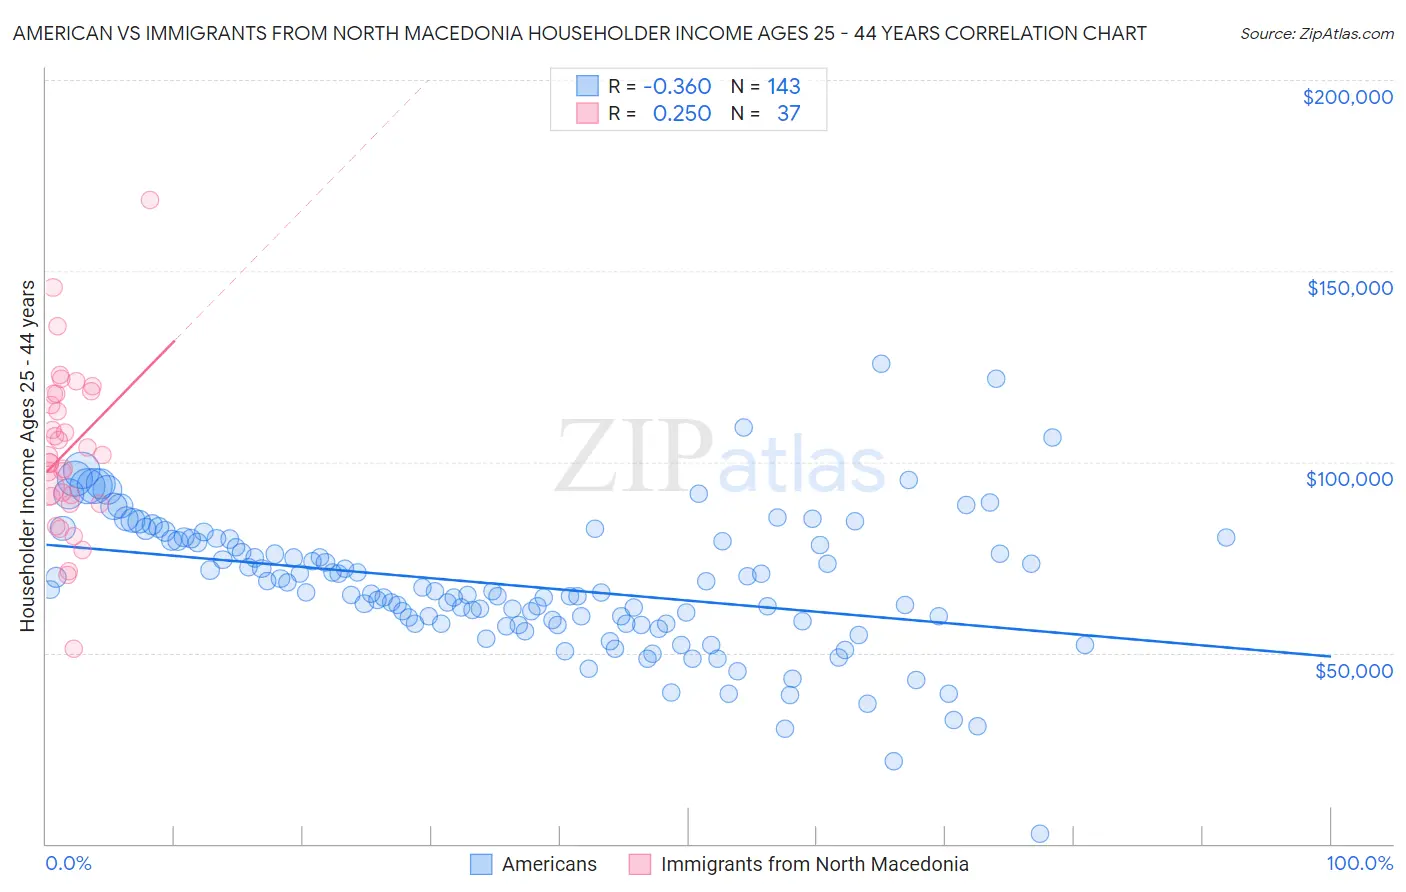 American vs Immigrants from North Macedonia Householder Income Ages 25 - 44 years